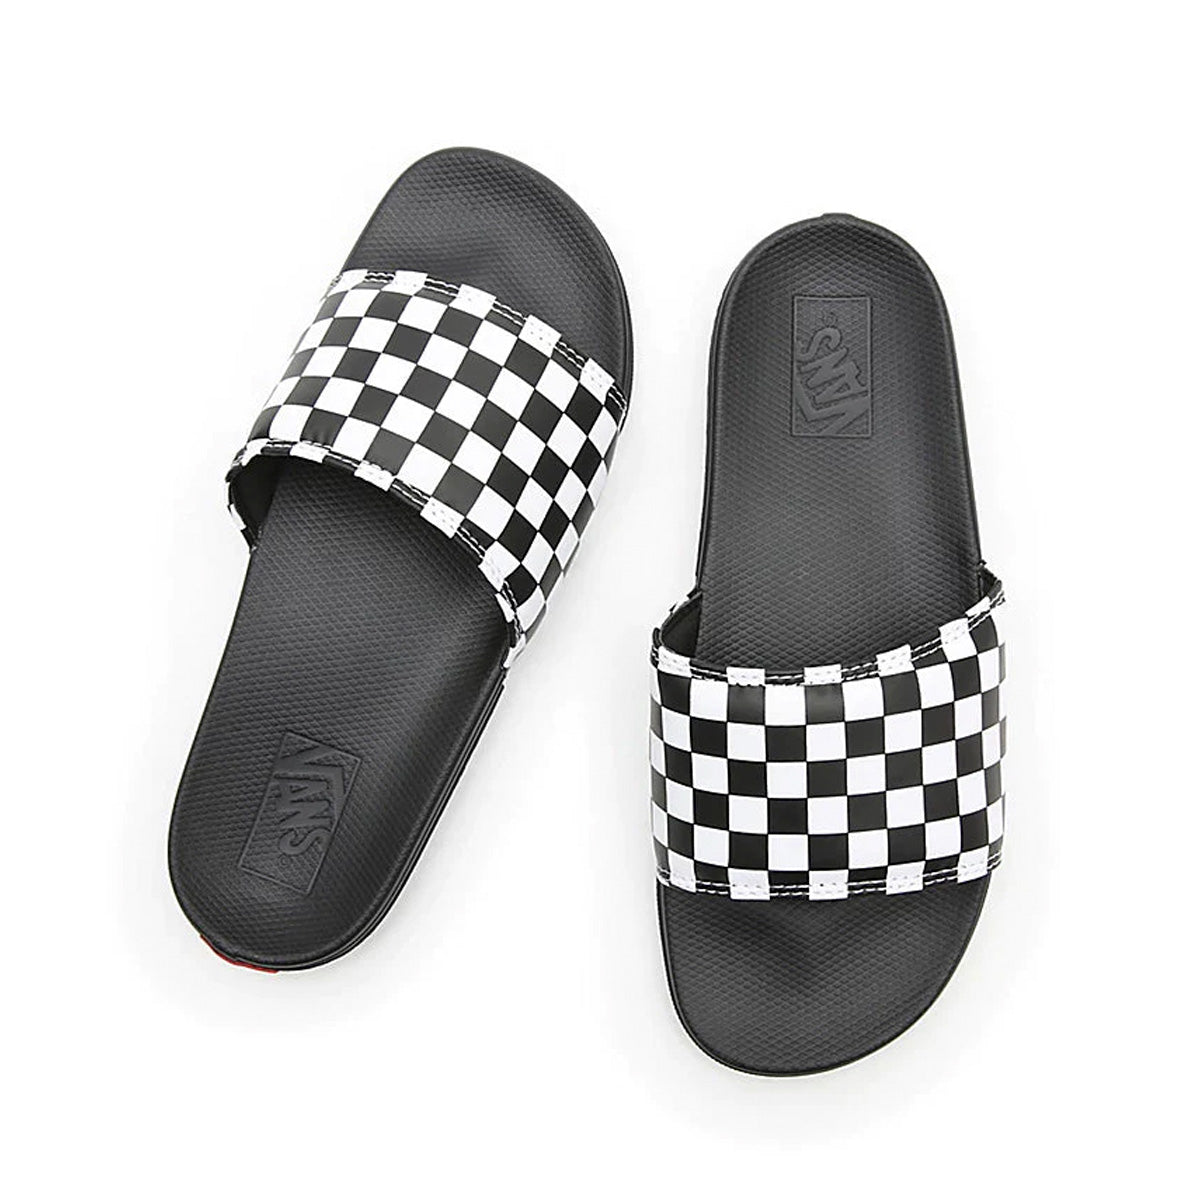 Black vans sliders with checkerboard strap. Free uk shipping over £50